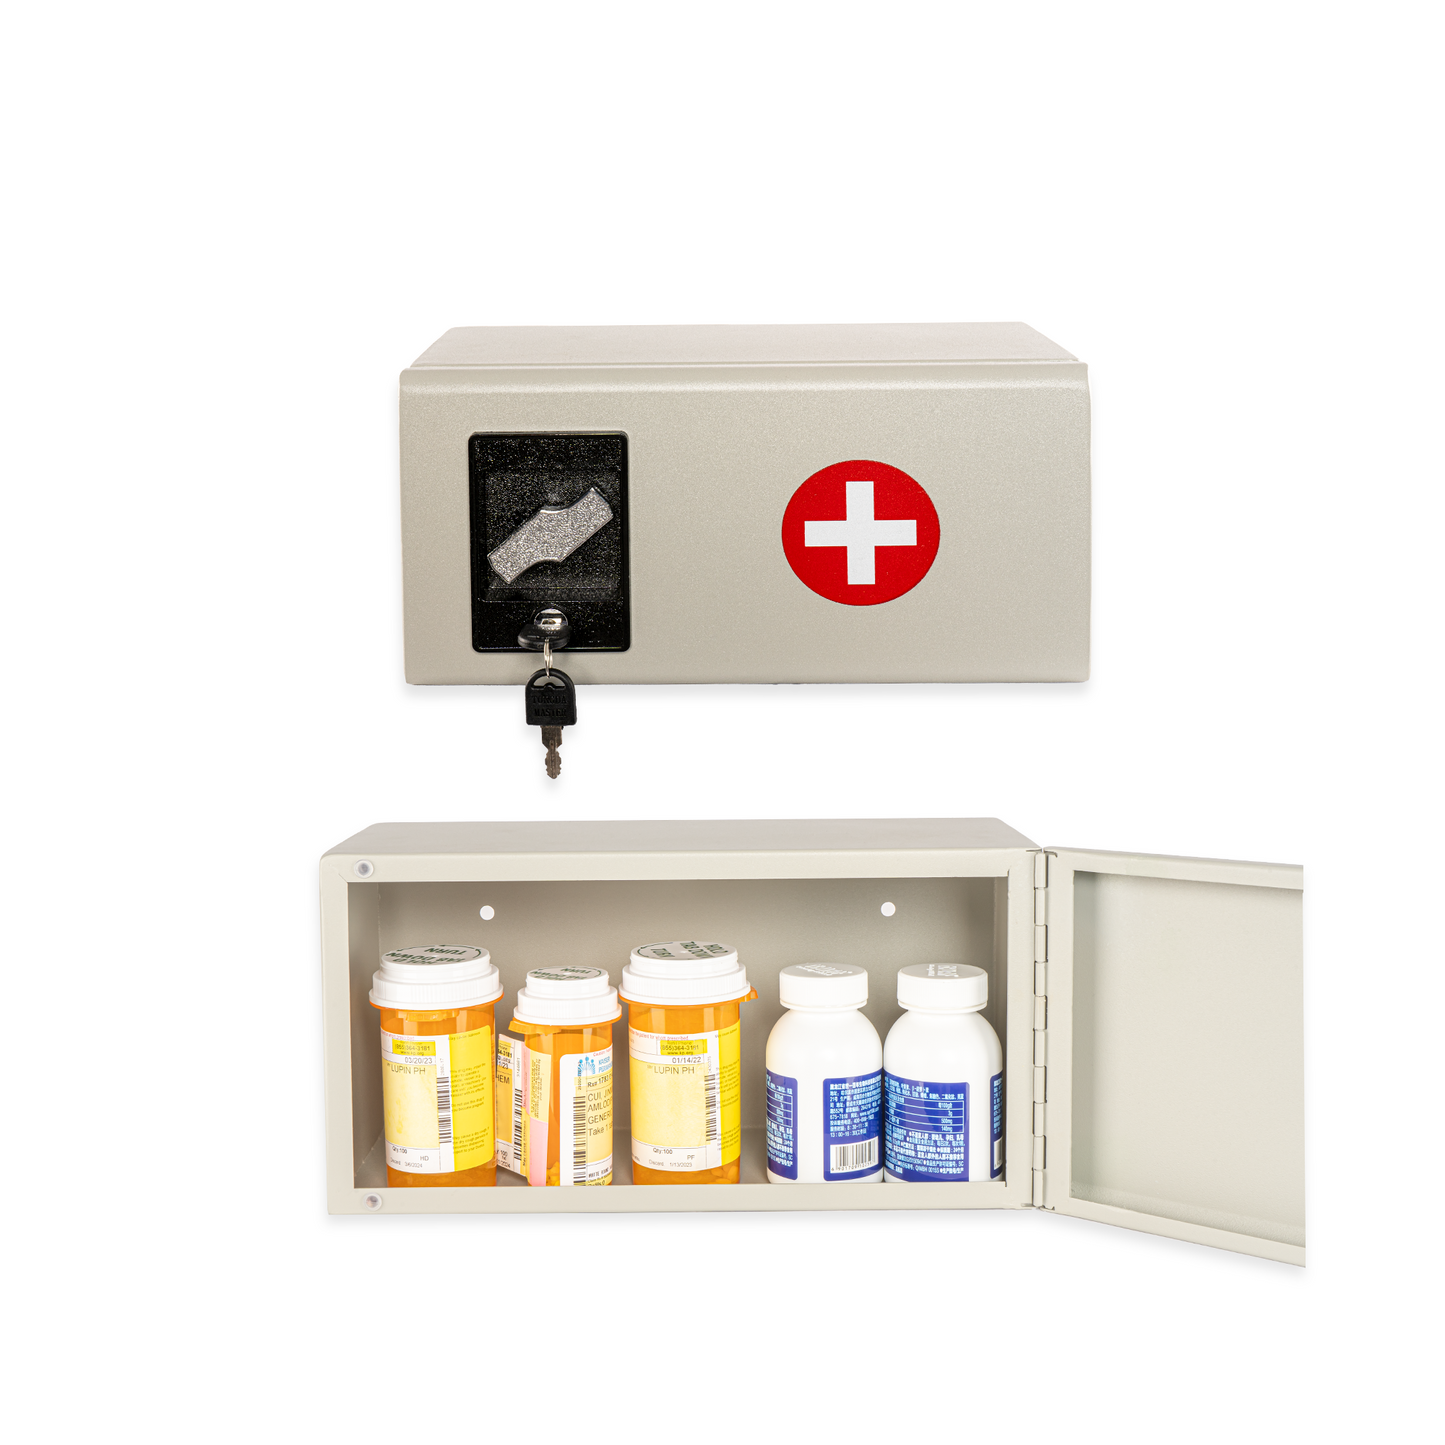 M-MC-5 - Medicine Lock Box for Medication Lock Box with Key - Wall Mounted Locking First Aid Medicine Cabinet, Secured Prescription Storage for Peace of Mind Around Kids at Home, School (White)